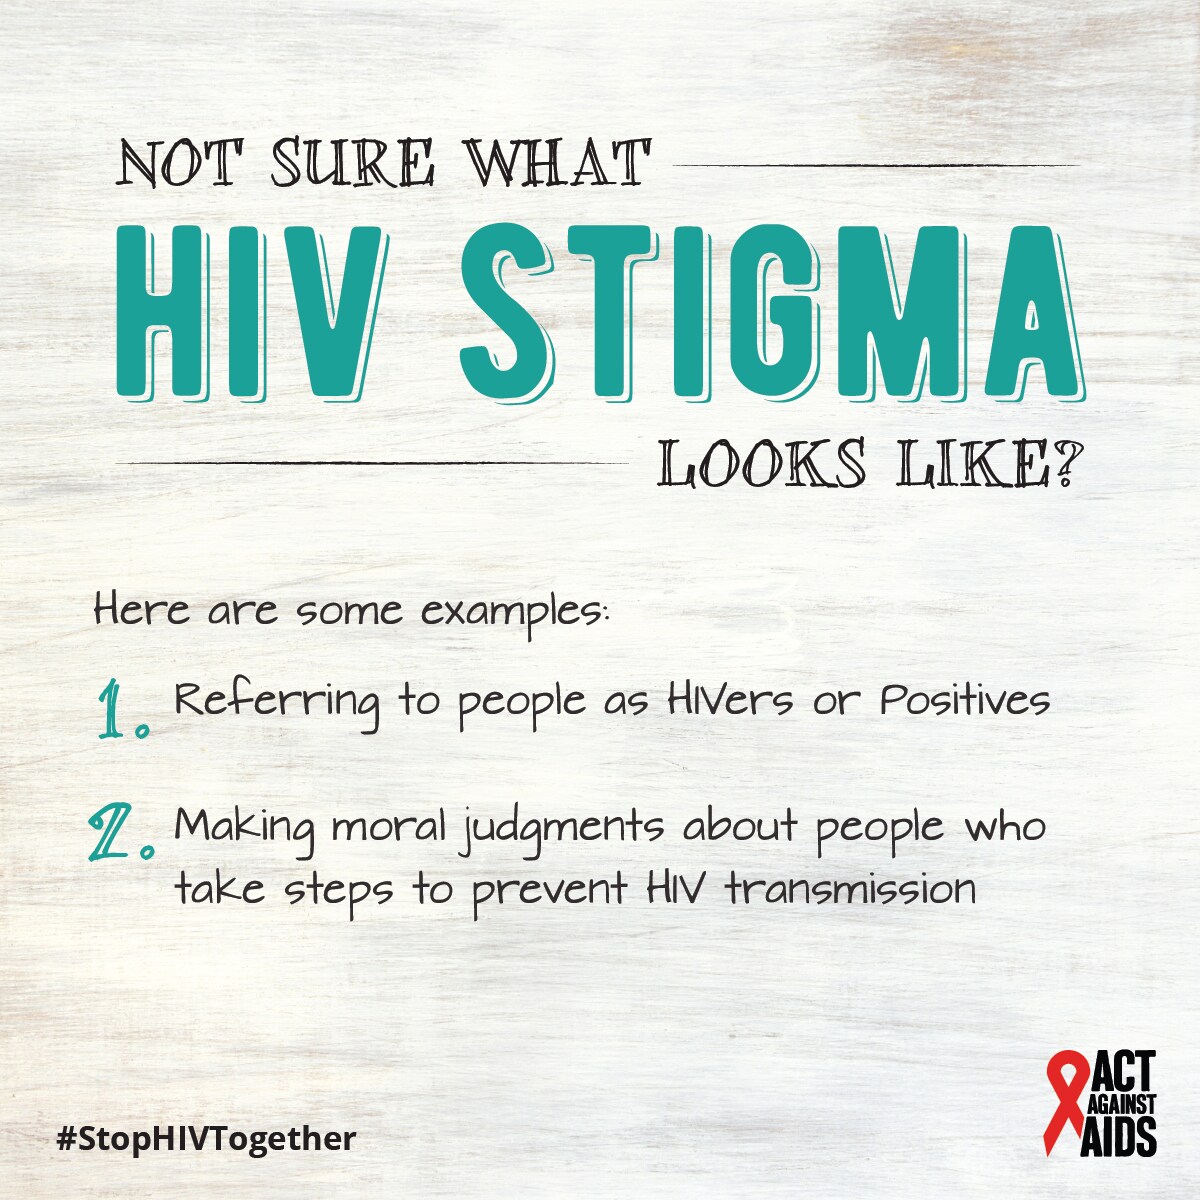 Not sure what HIV stigma looks like? Here are some examples: 1. Referring to people as HIVers or Positives 2. Making moral judgments about people who take steps to prevent HIV transmission. #StopHIVTogether Act Against AIDS